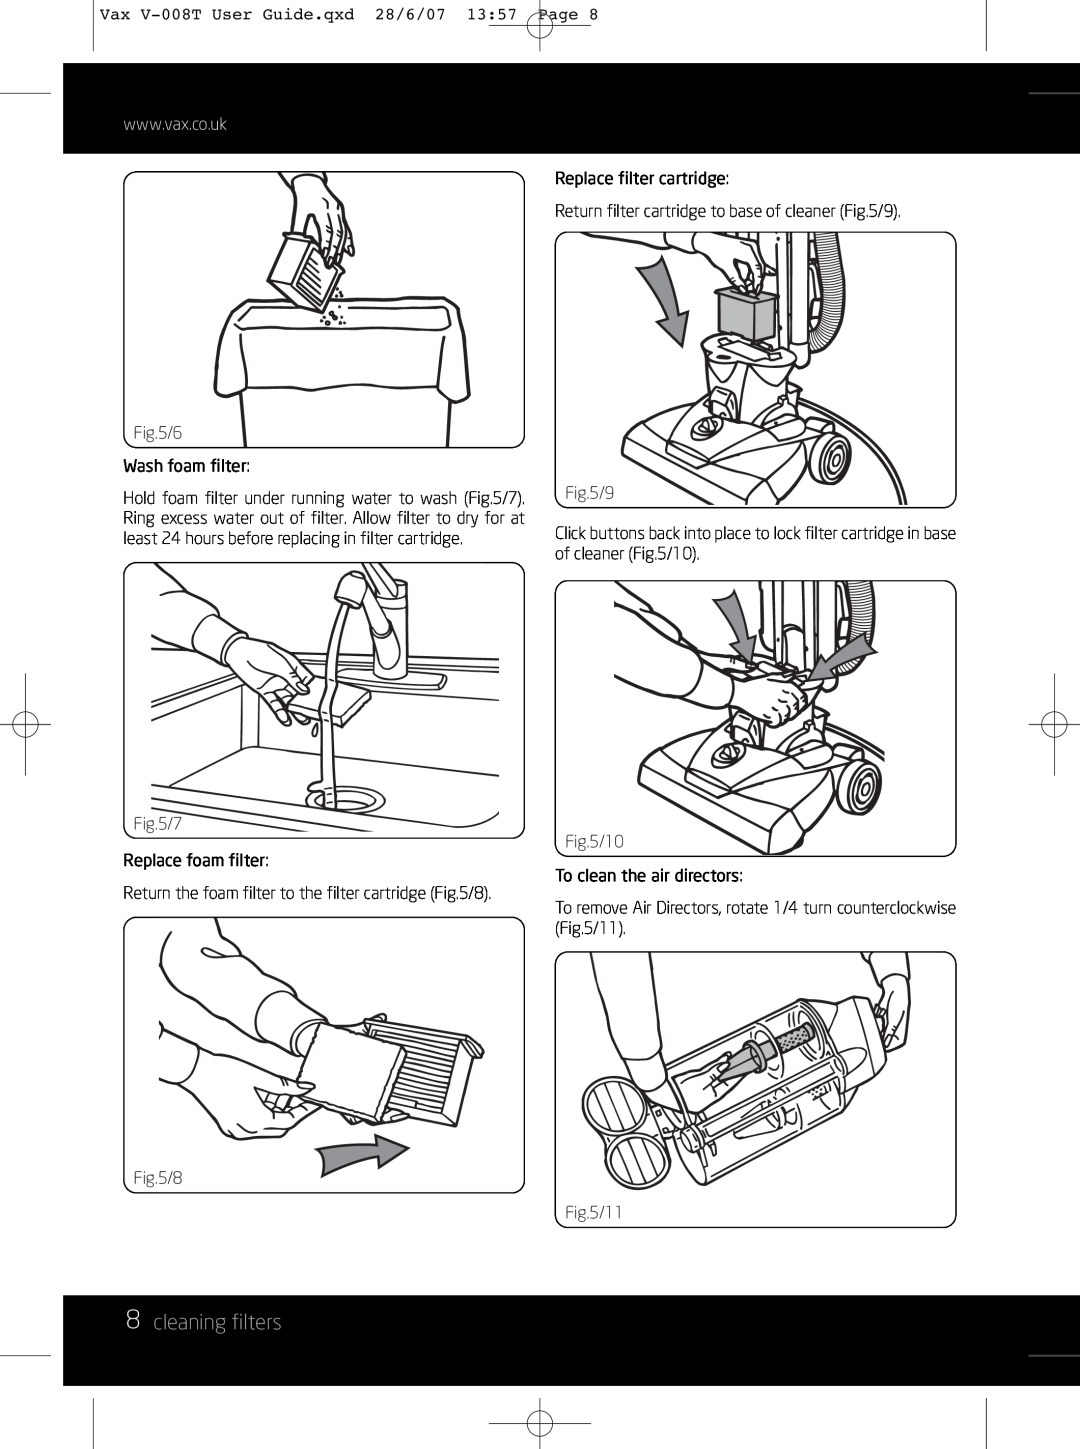 Vax V-008T instruction manual 8cleaning filters 